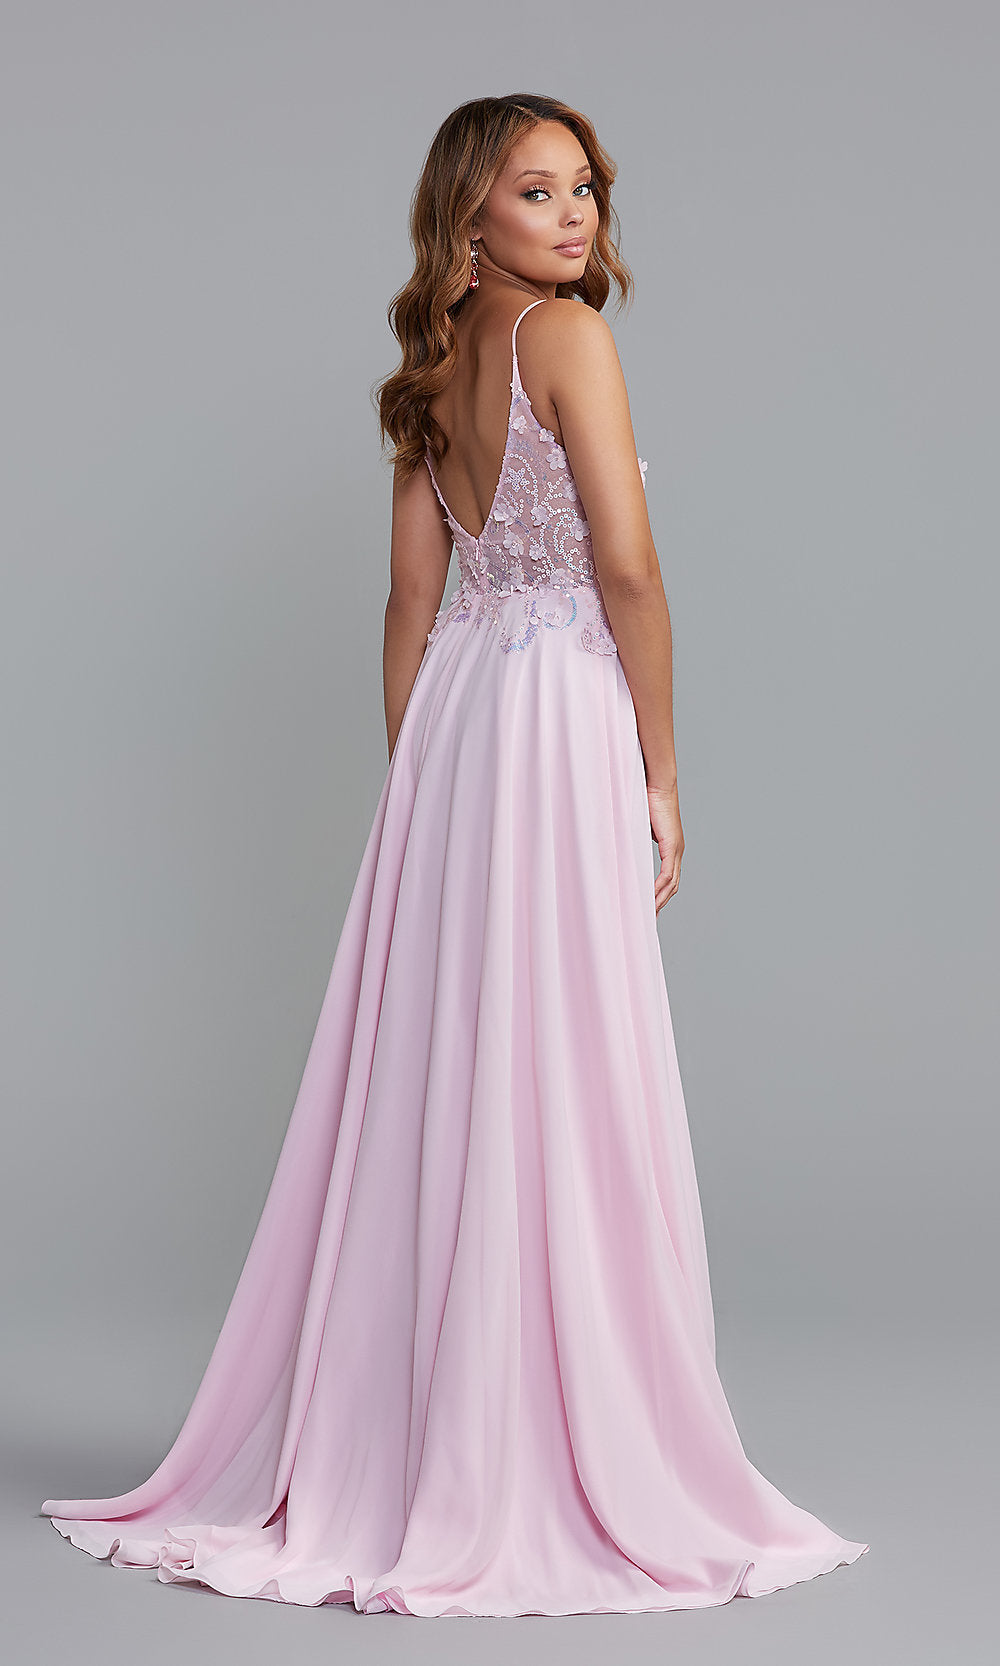  Sheer-Bodice Long A-Line Prom Dress with Double Slits